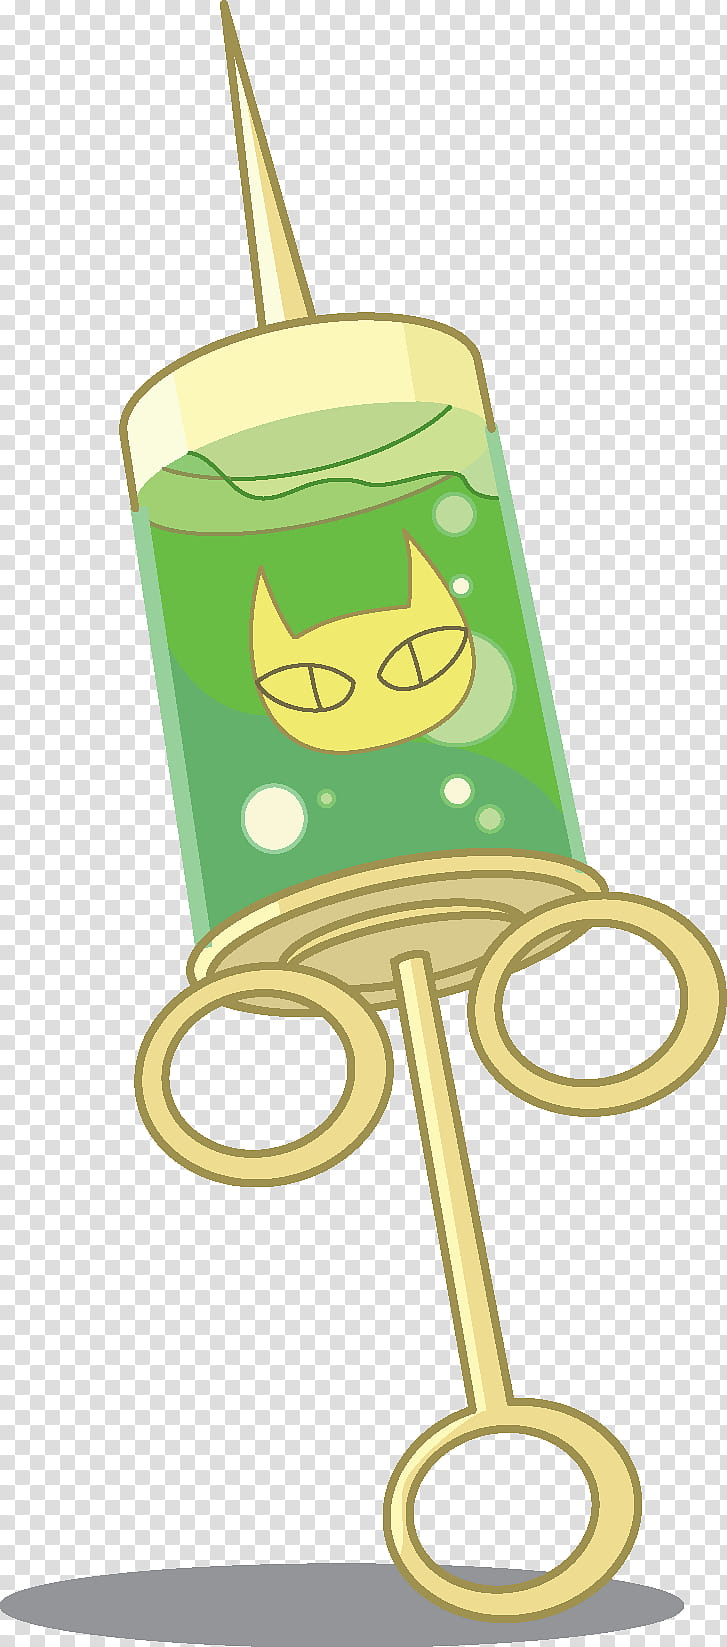 Me Mow Poison, green and yellow syringe transparent background PNG clipart